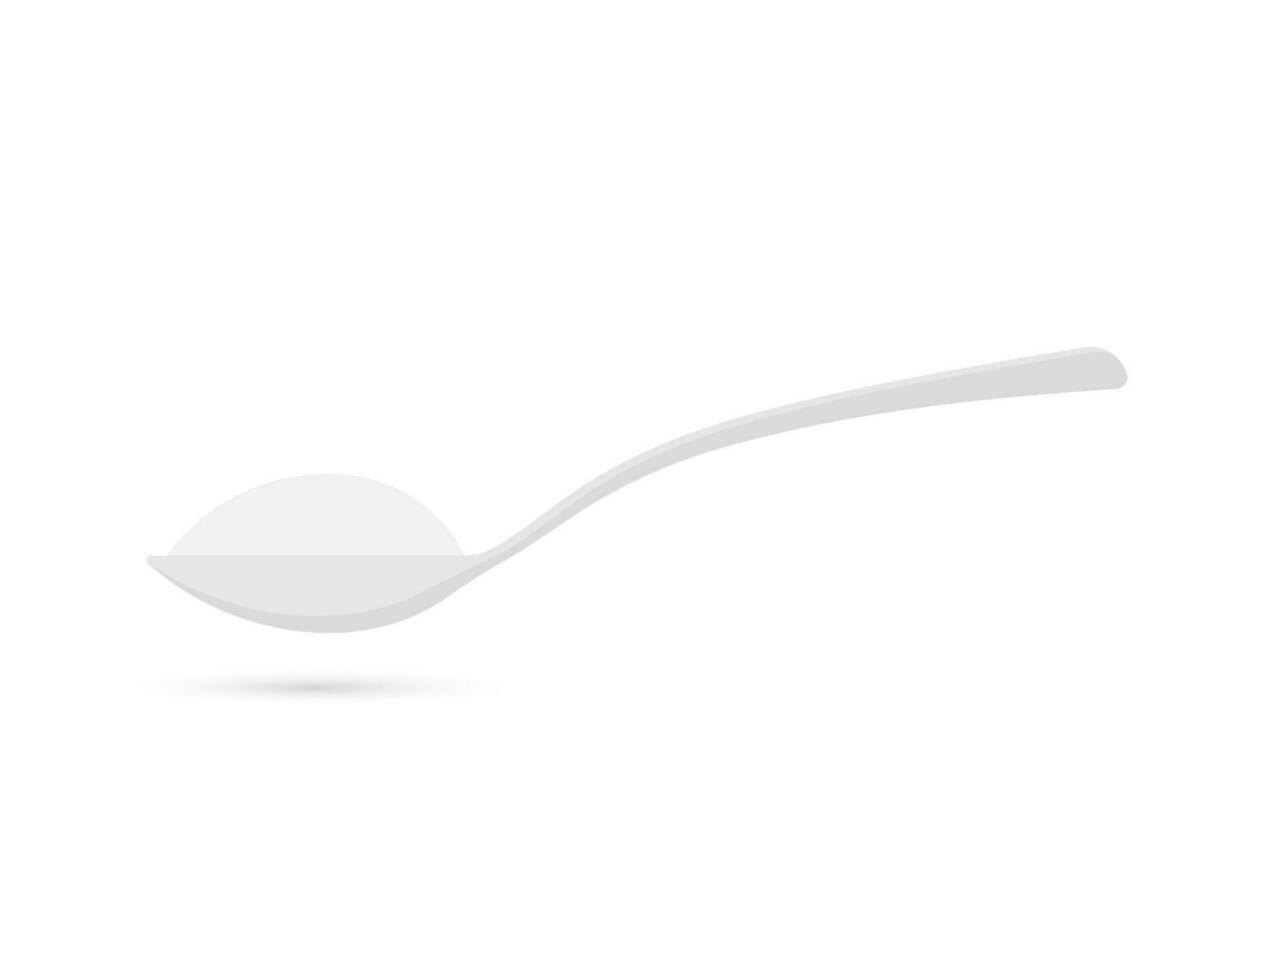 Pour. Spoon with sugar. Baking and cooking Ingredients. Vector stock illustration